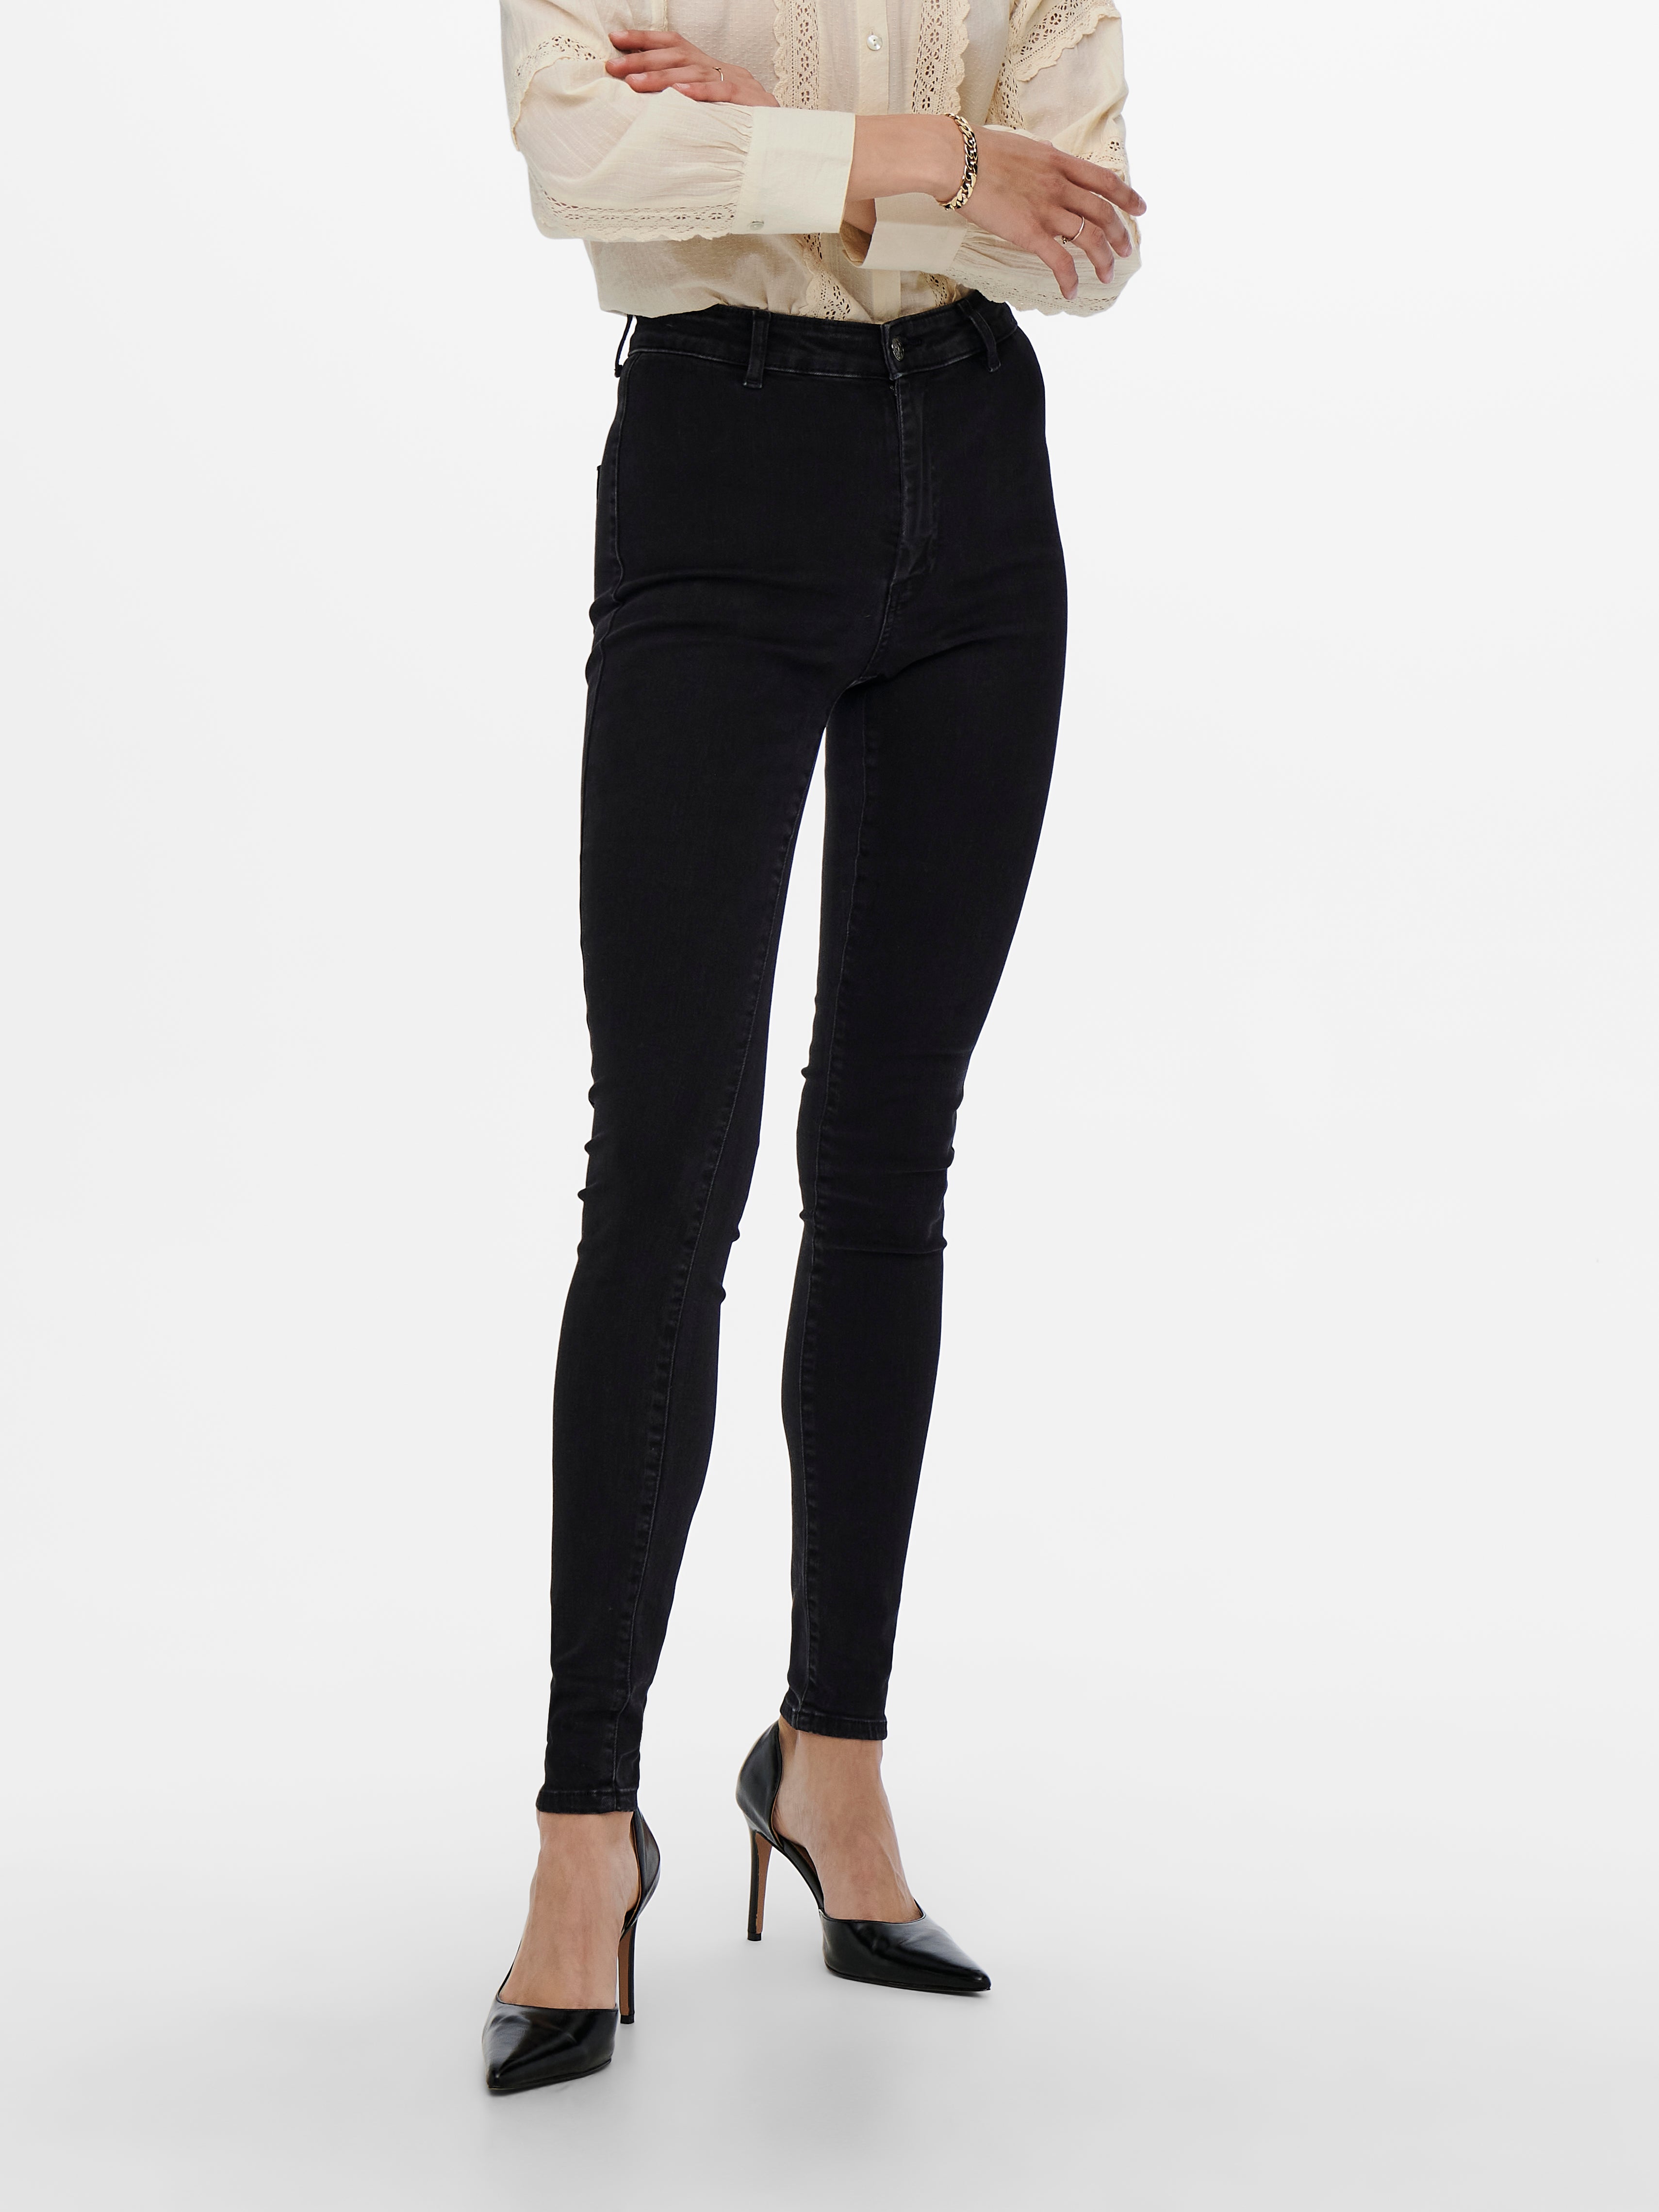 Women's Jeans: Black, Grey, Blue & More | ONLY